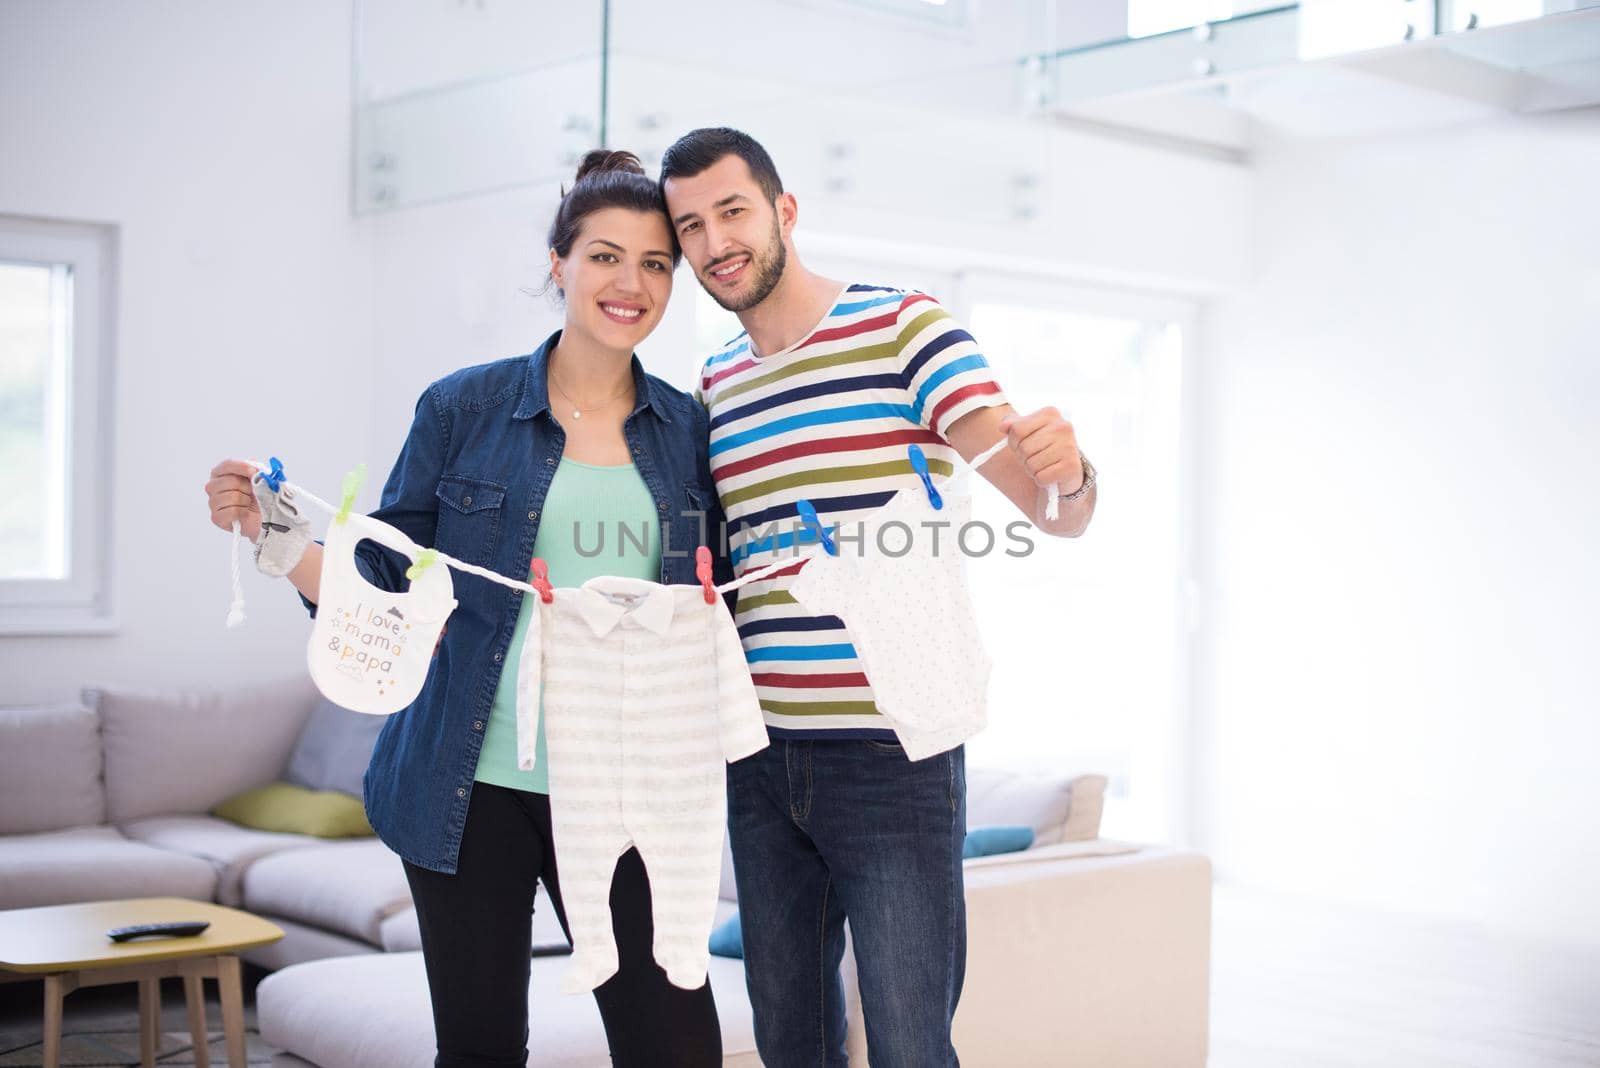 Beautiful pregnant woman and her husband expecting baby holding baby bodysuits and smiling at home